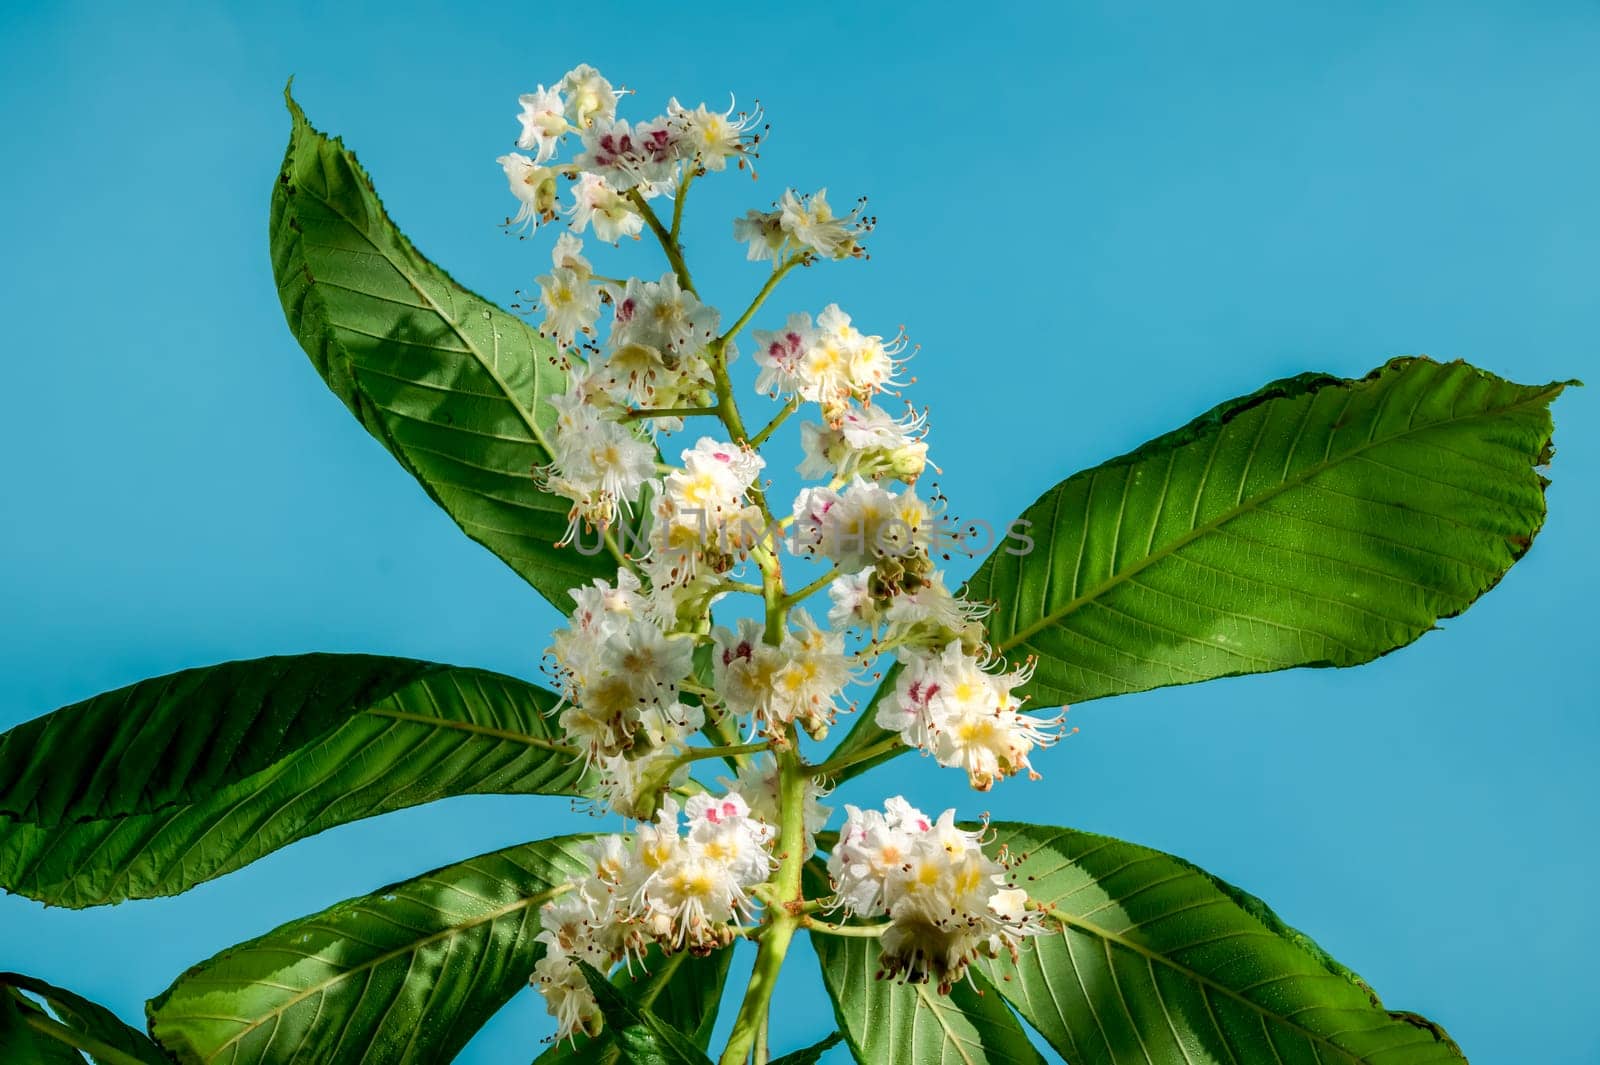 Blooming chestnut tree flowers on a blue background by Multipedia